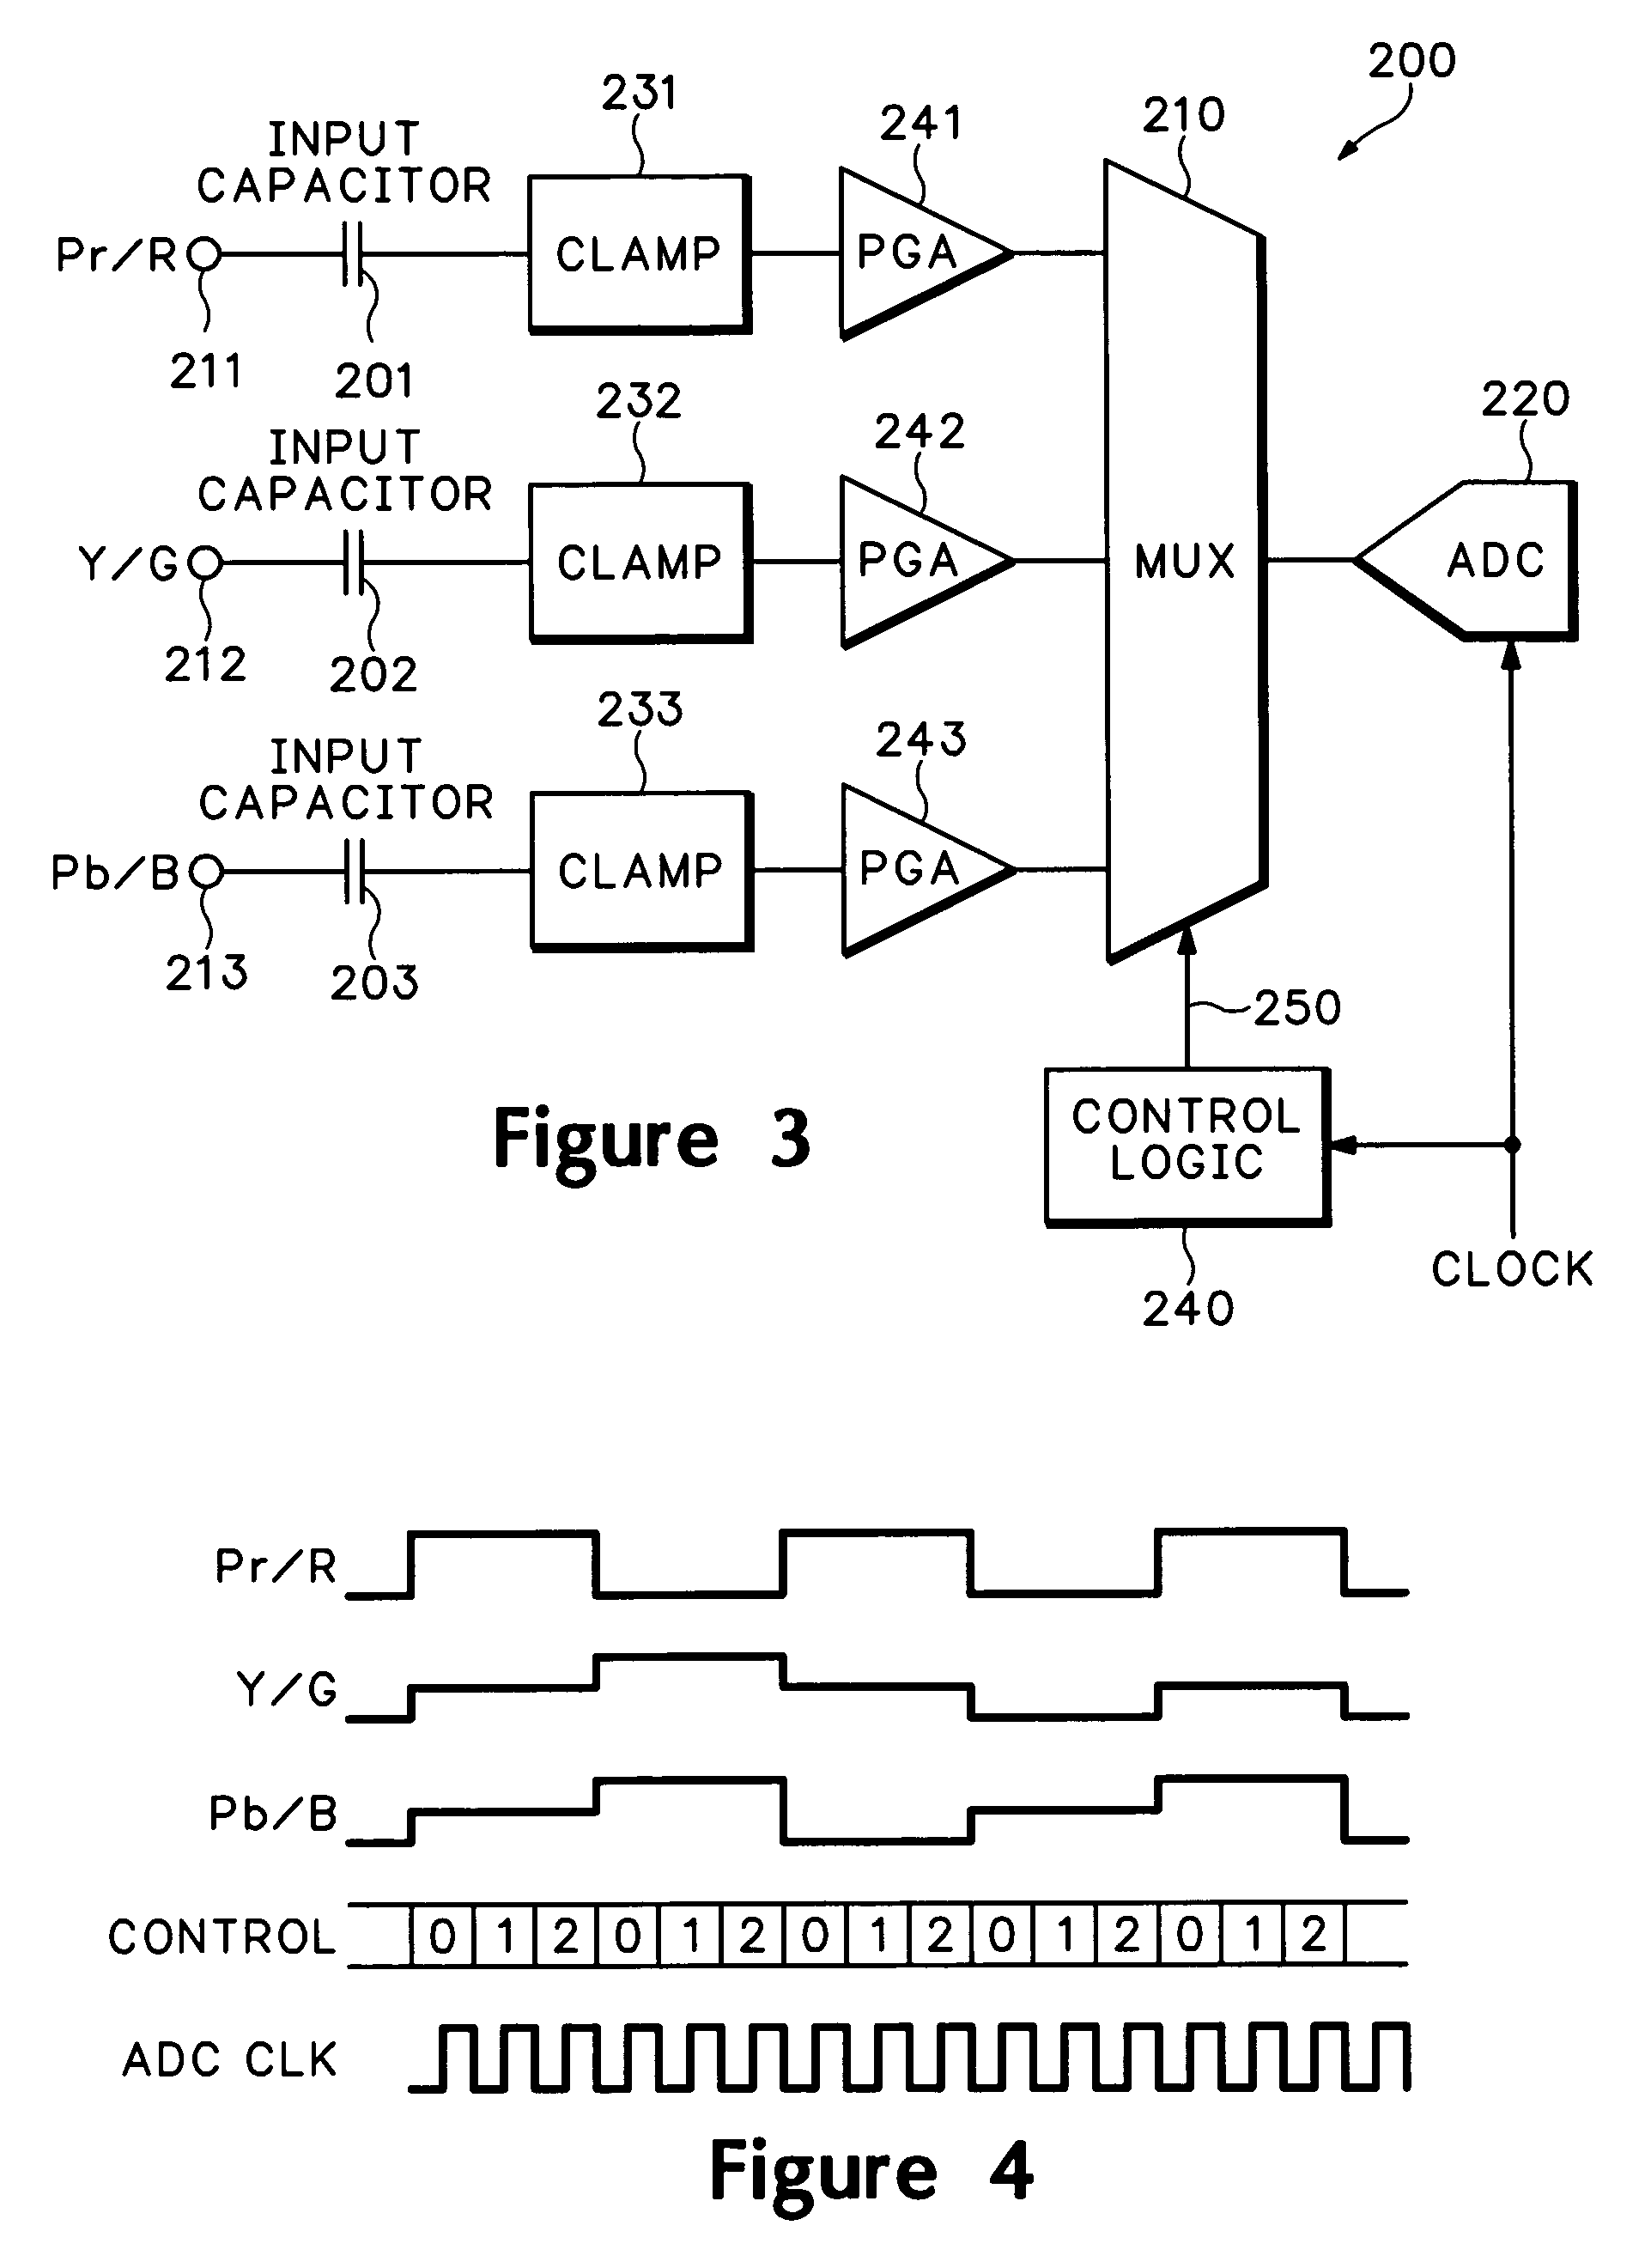 Multiplexed video digitization system and method